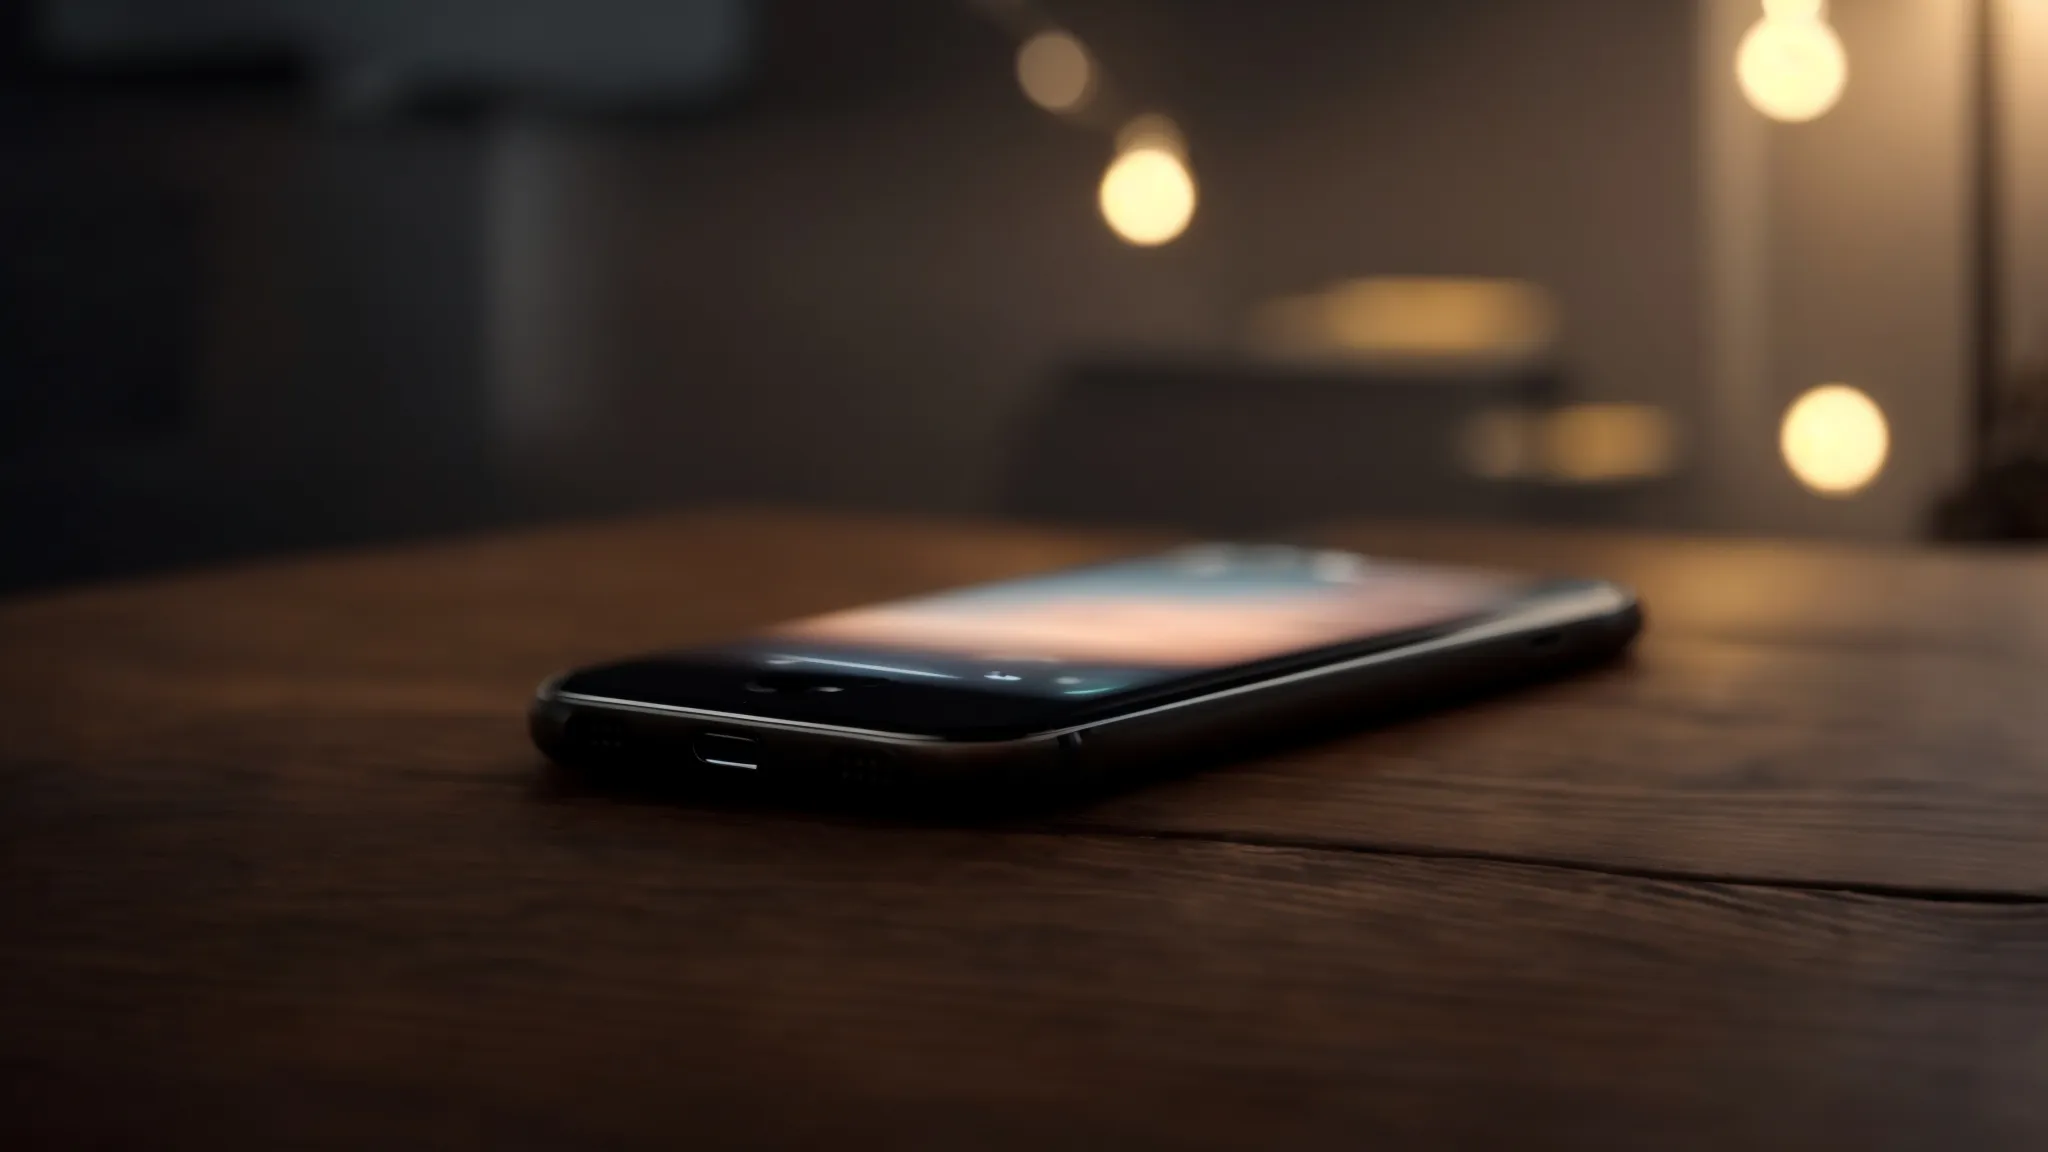 an iphone lays on a wooden table, its screen illuminated with an incoming call notification in a dimly lit room.